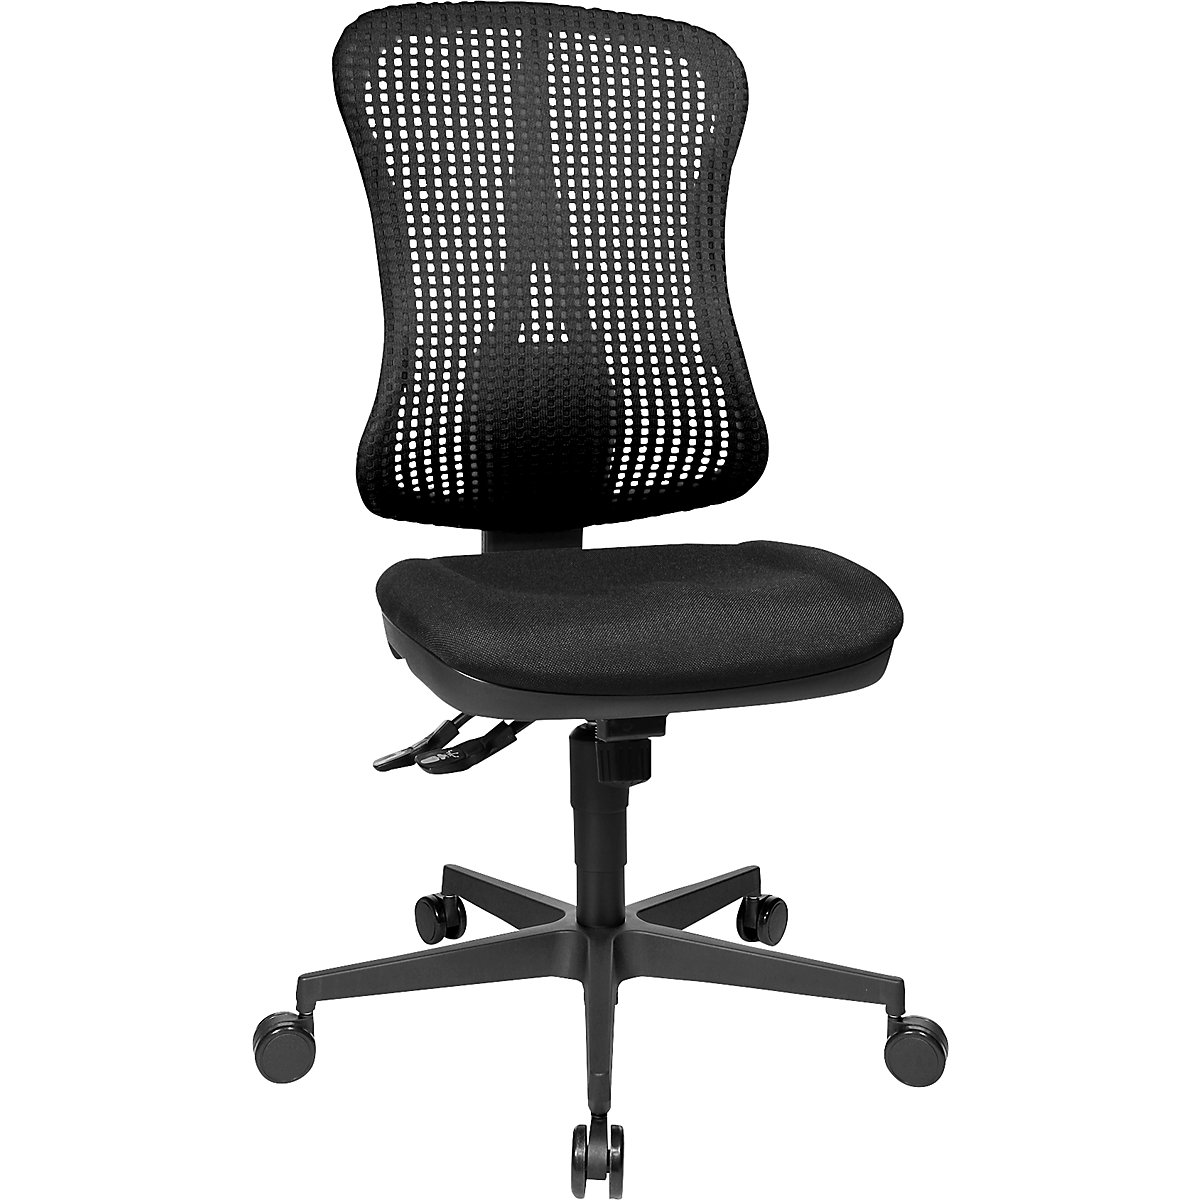 Ergonomic swivel chair, contoured seat – Topstar, without arm rests, black seat, black mesh back rest-8